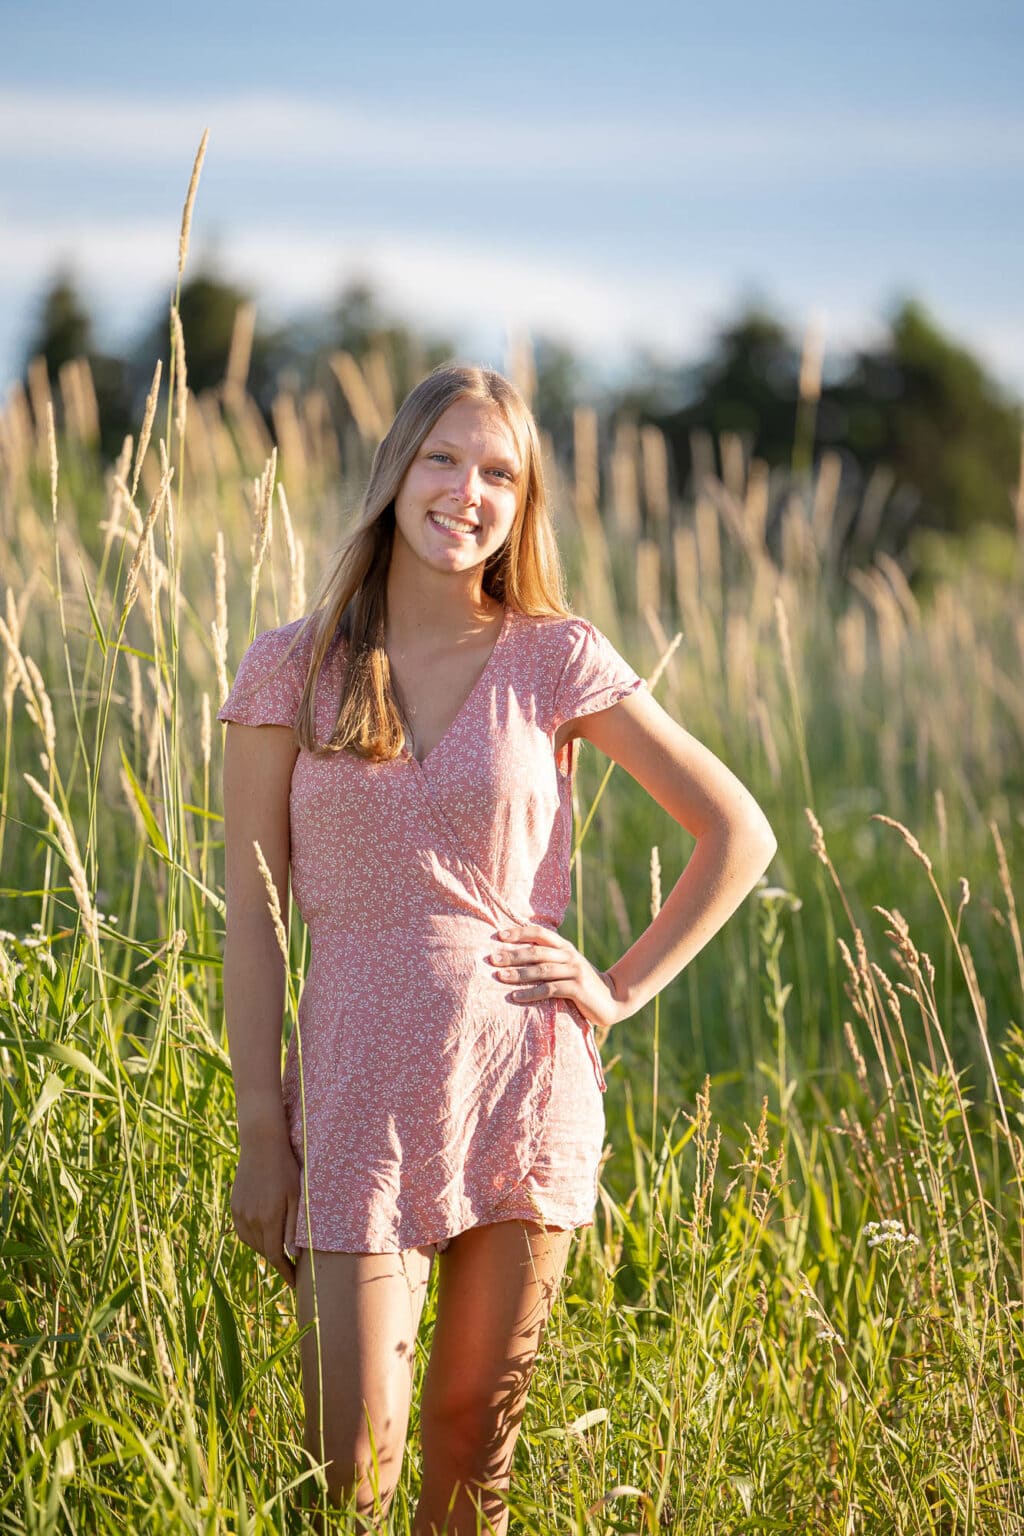 Downtown La Crosse Senior Photoshoot - J.L. Wiswell Photography ...